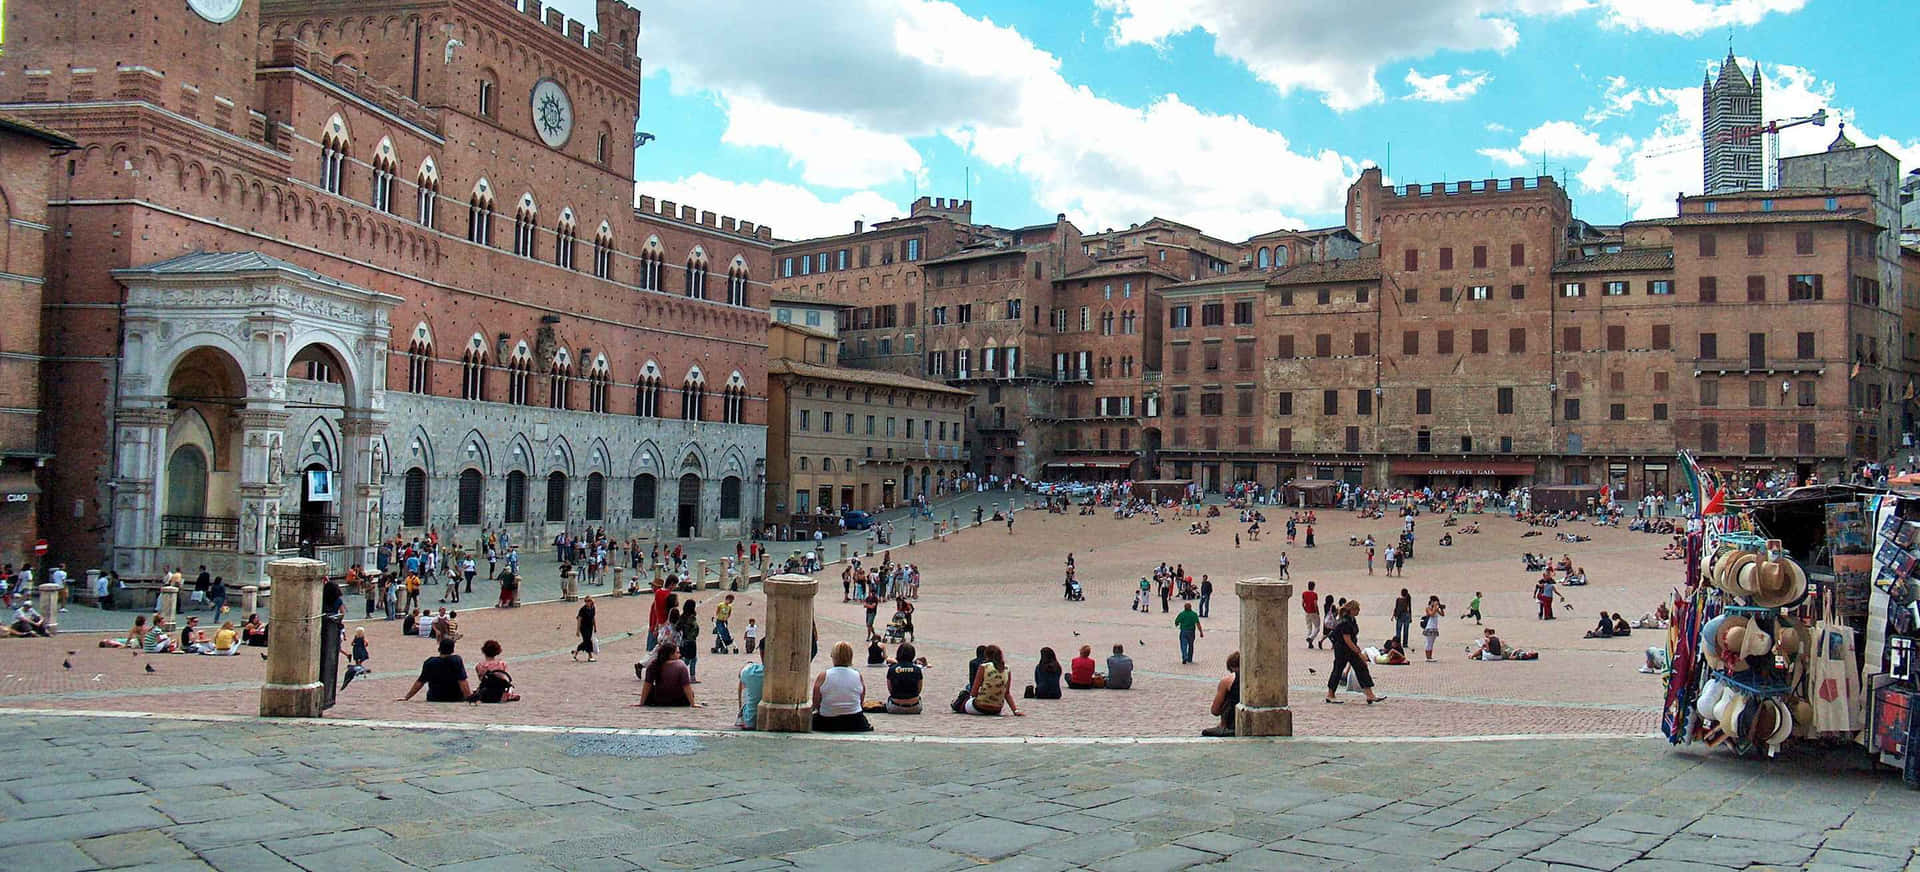 People At Piazza Del Campo In Siena Picture